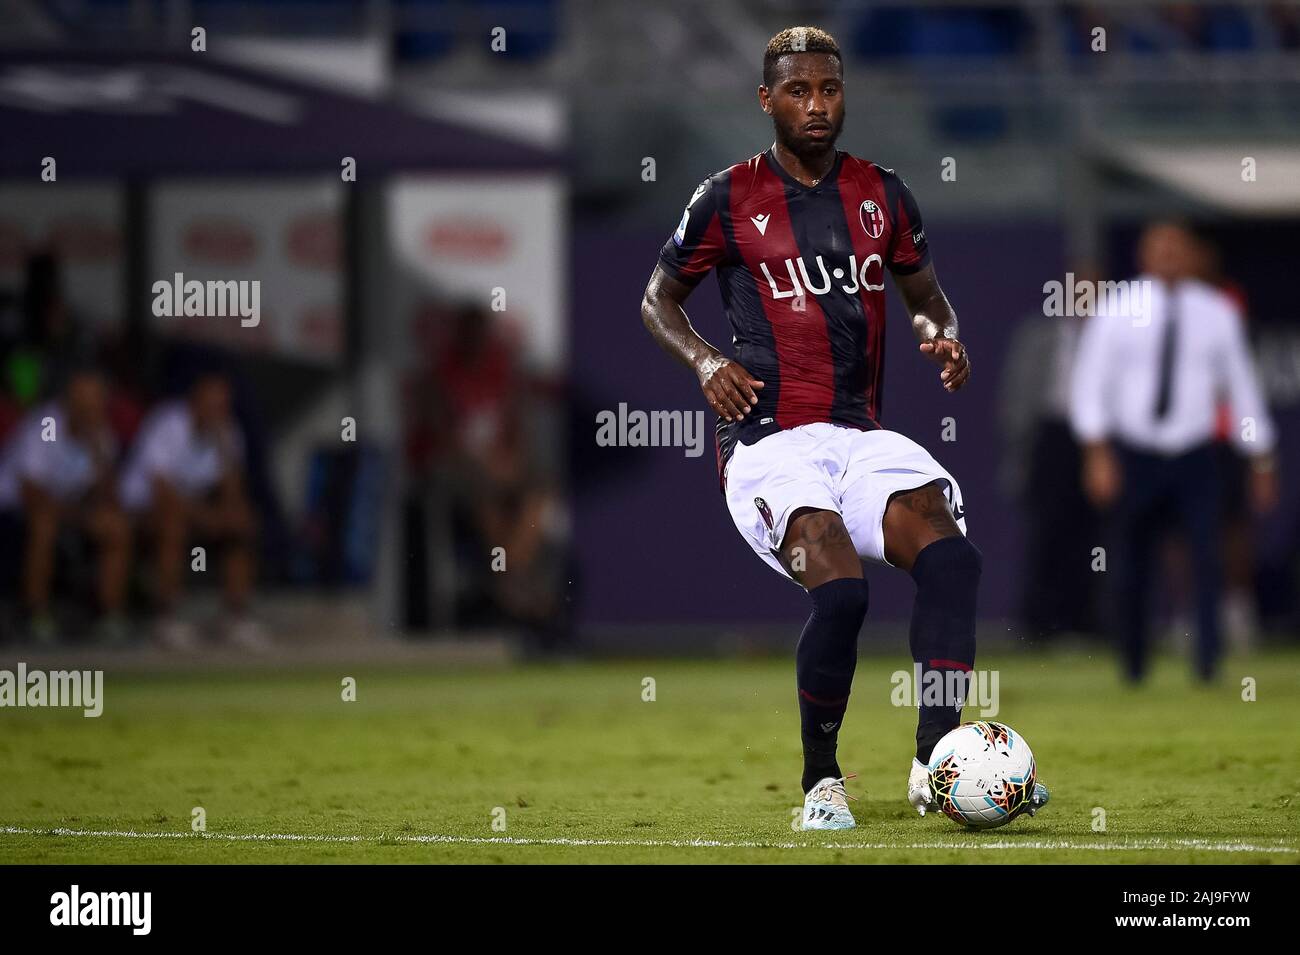 Bologna, Italy. 30 August, 2019: Stefano Denswil of Bologna FC in action during the Serie A football match between Bologna FC and SPAL. Bologna FC won 1-0 over SPAL. Credit: Nicolò Campo/Alamy News Stock Photo